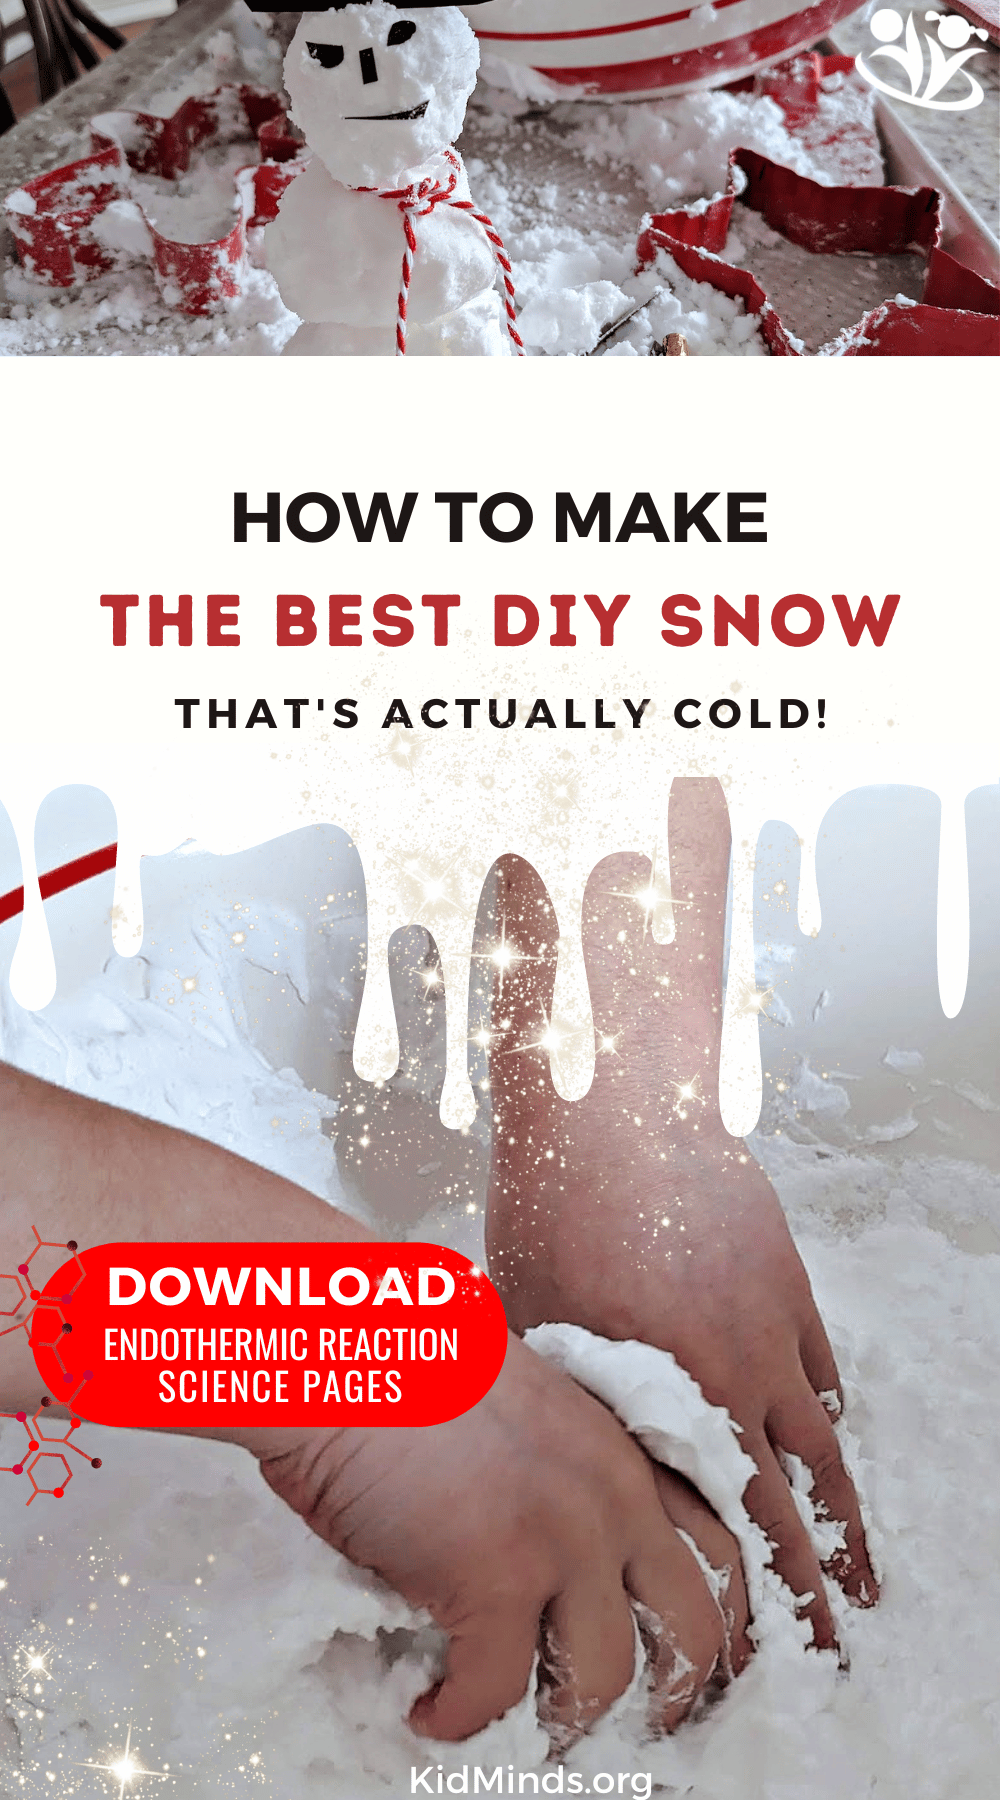 The endothermic reaction between baking soda and shaving cream adds a truly magical touch to this classic winter boredom buster. The DIY snow is actually cool to the touch! Scroll down for science explanations + science printables.  #STEM #kidsactivities #scienceactivities #bakingsodascience #elementaryeducation #laughingkidslearn #kidminds #boredombusters #winteractivities